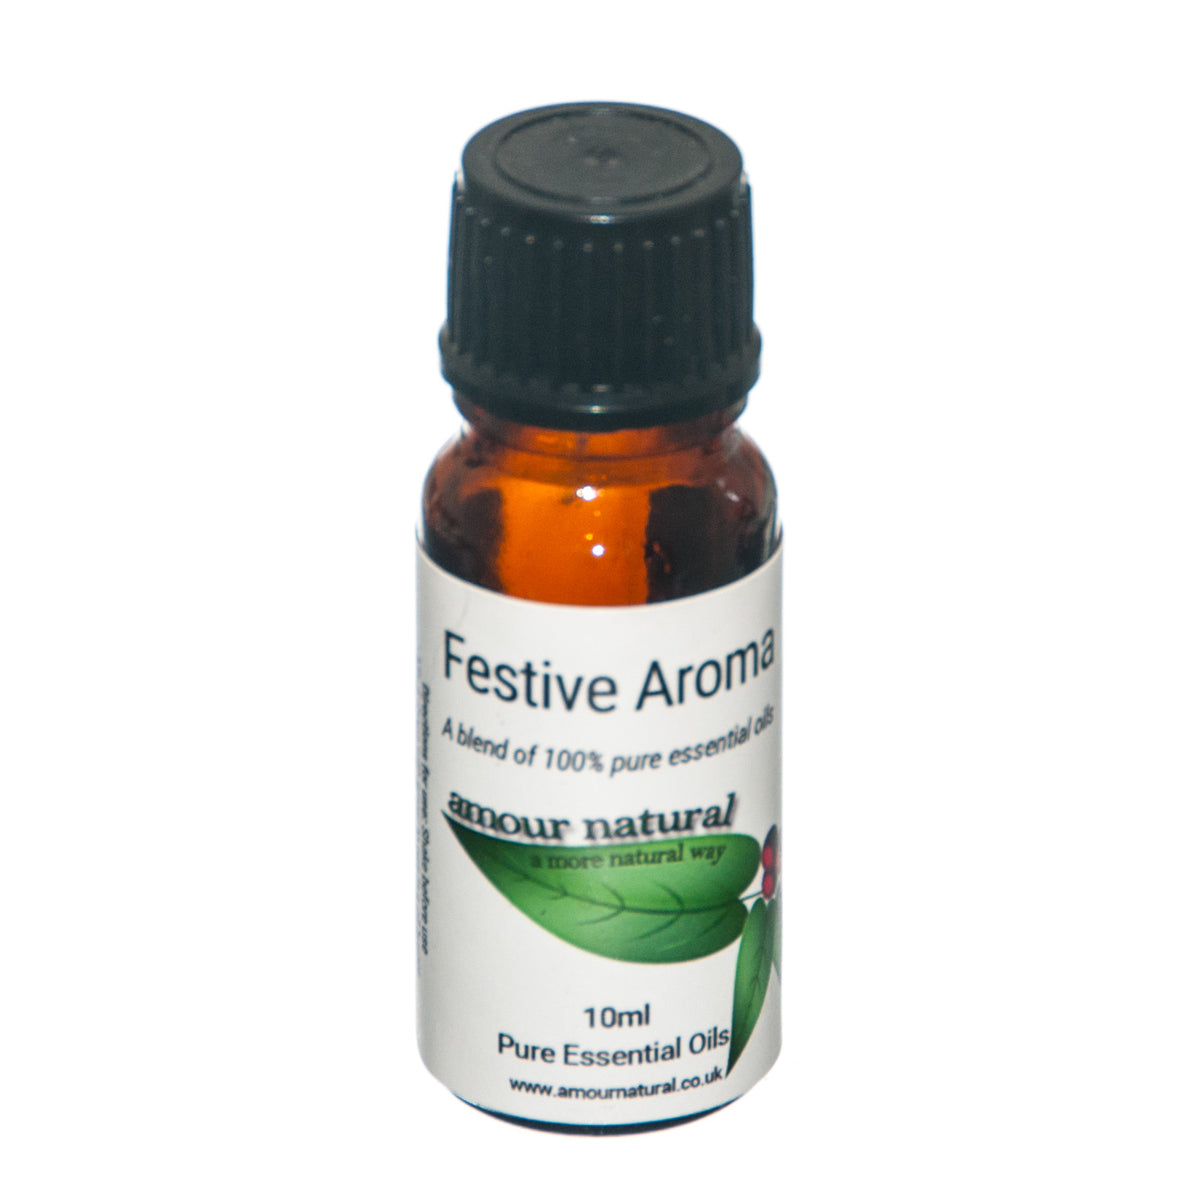 Amour Natural Festive Aroma Essential Oil 10ml